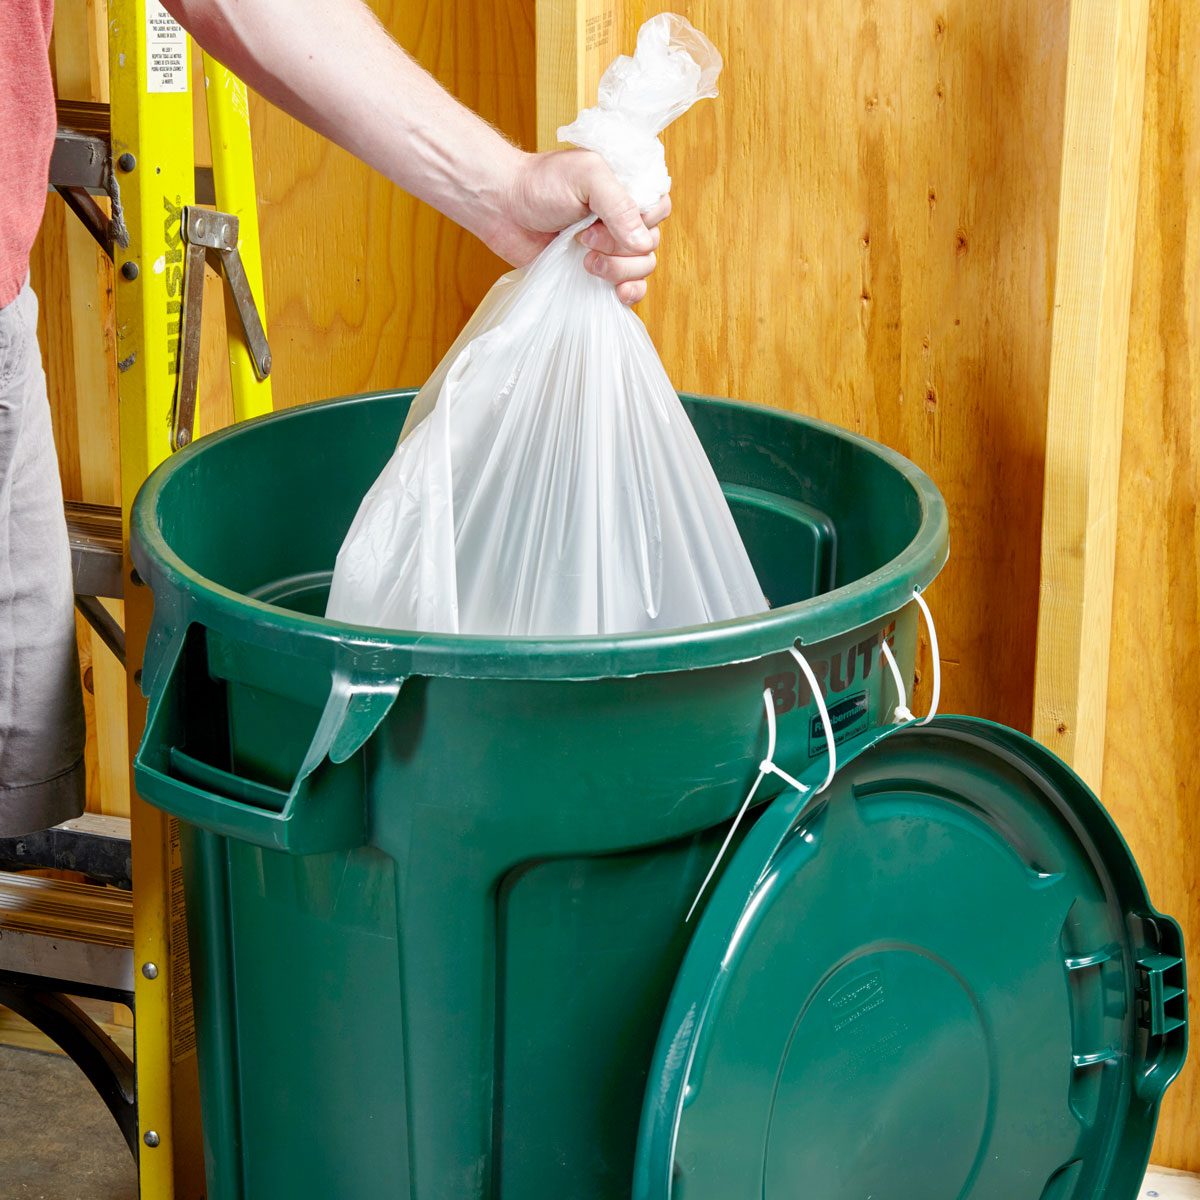 14 Tips and Tricks for Your Trash Can and Bags